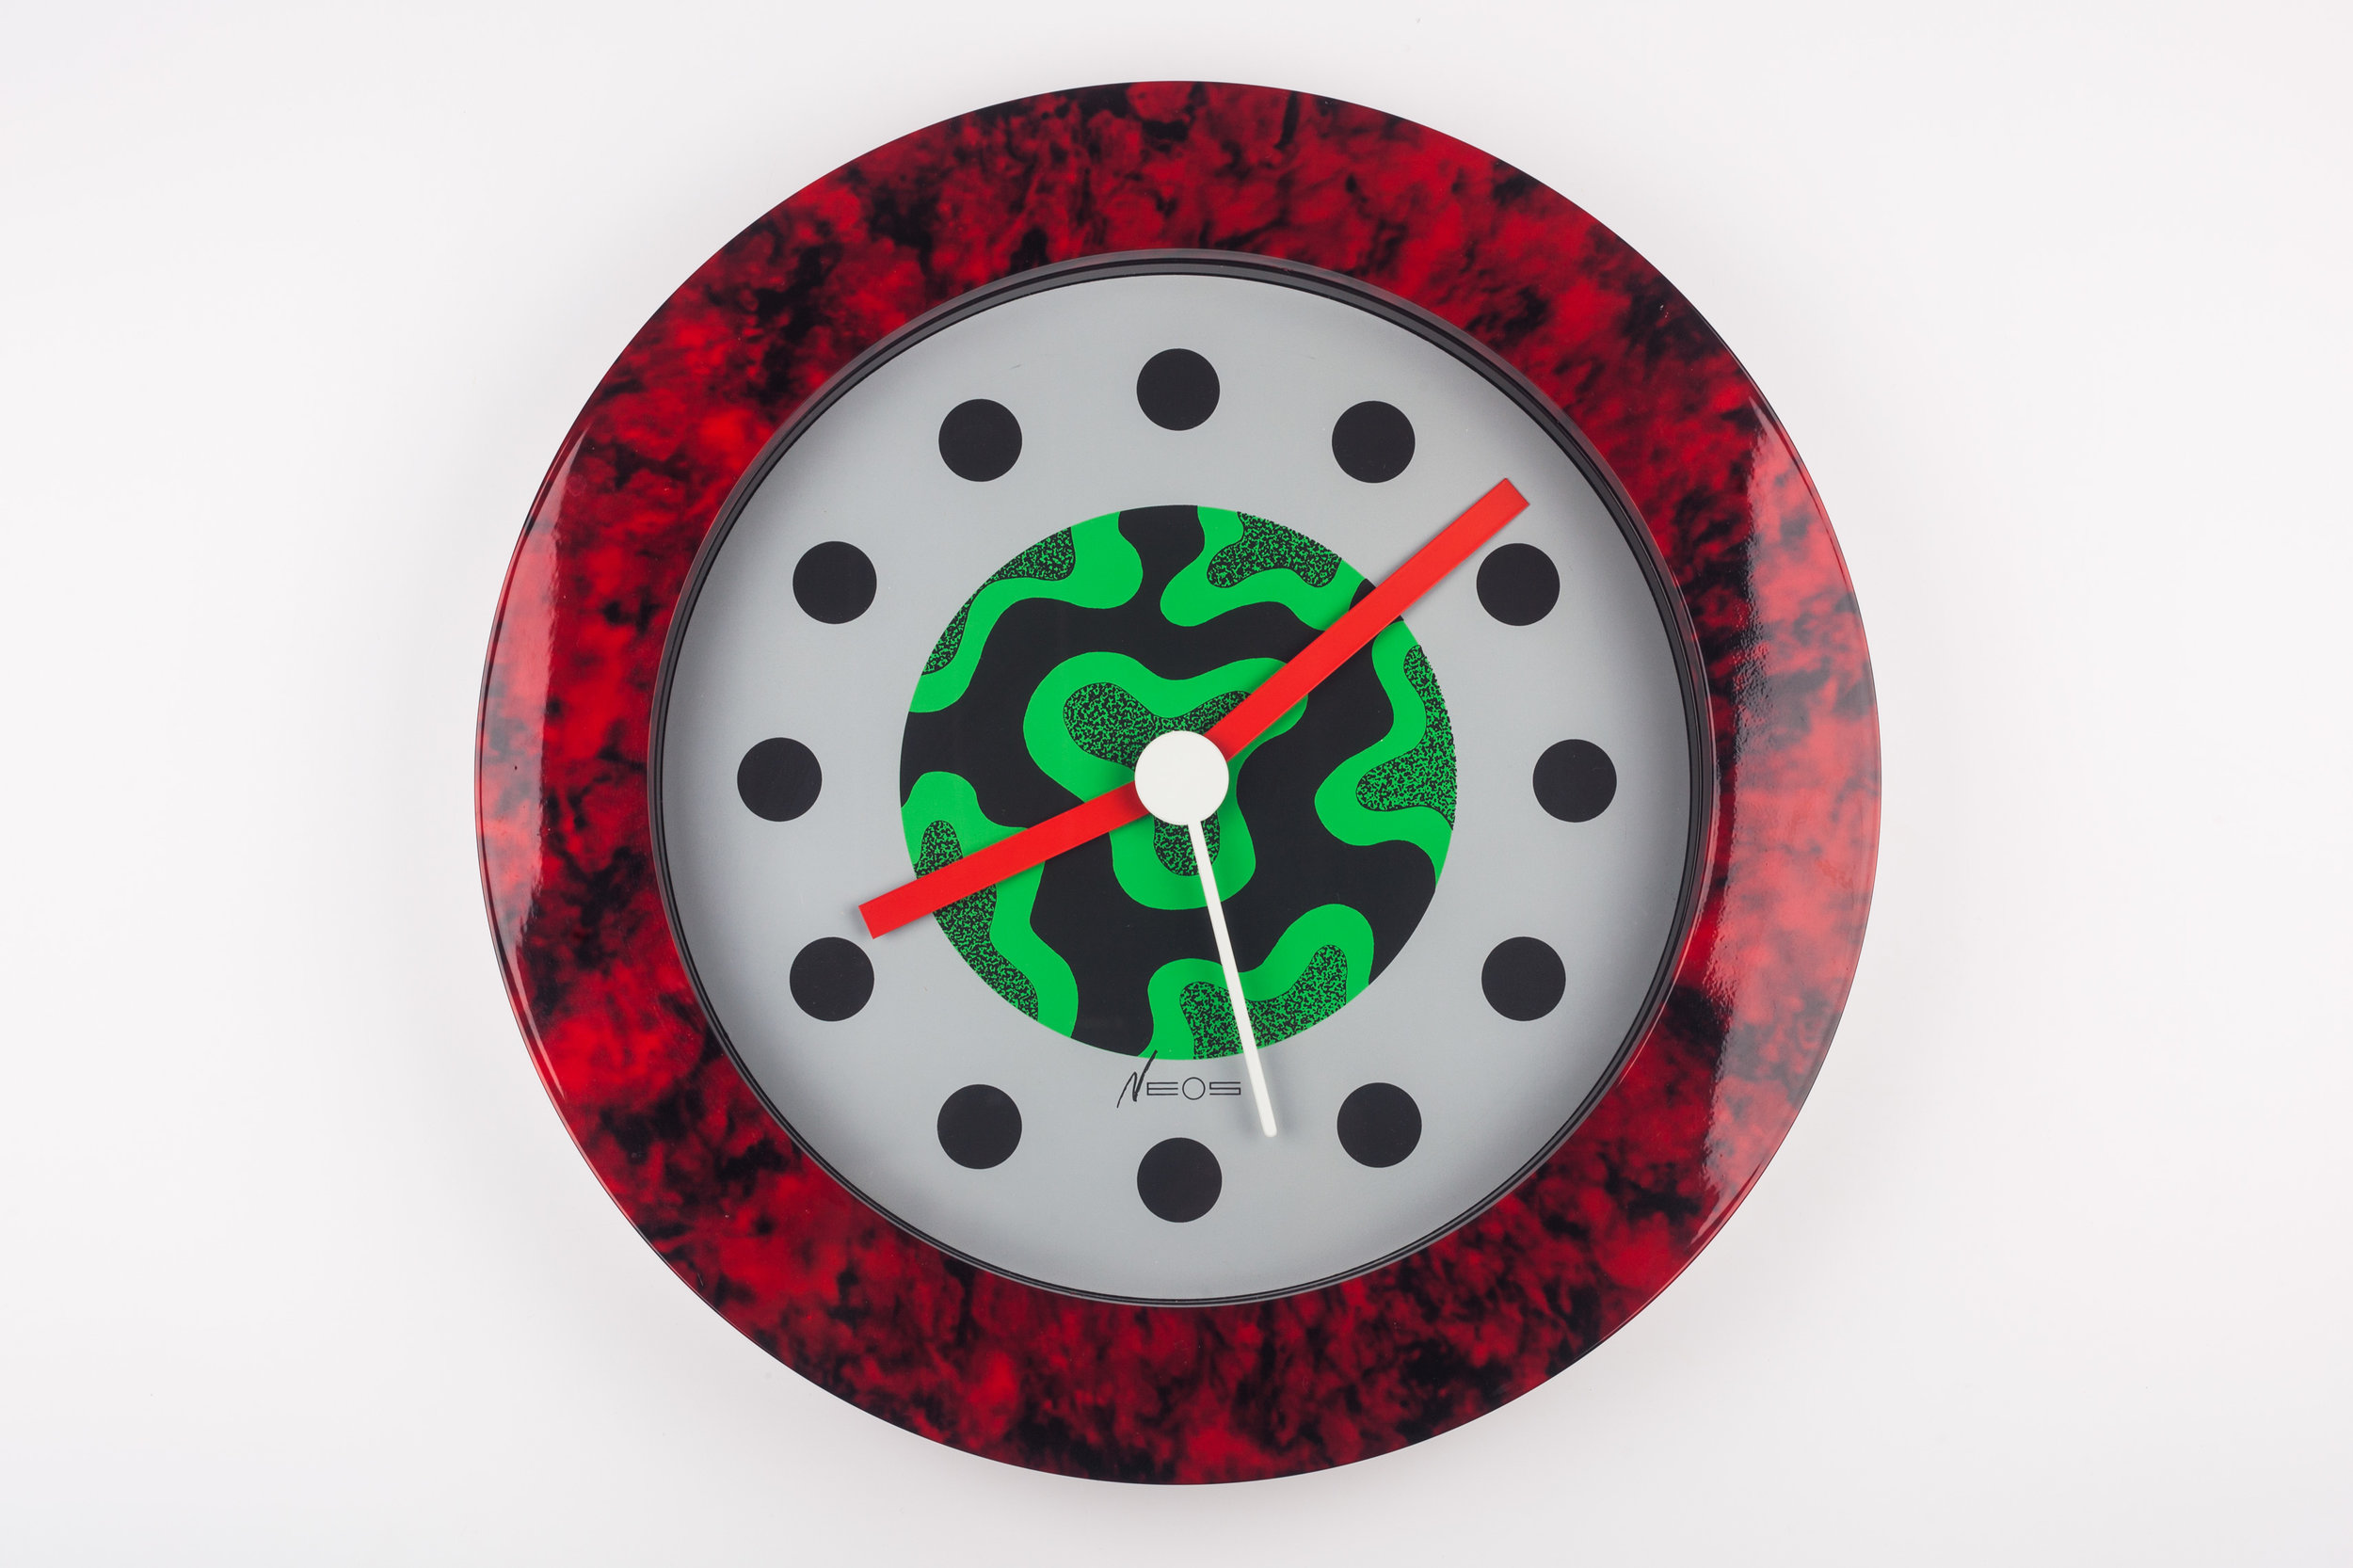 MEMPHIS WALL CLOCK, RED MARBLE EFFECT, DU PASQUIER &amp; SOWDEN X NEOS, ITALY, 1980S